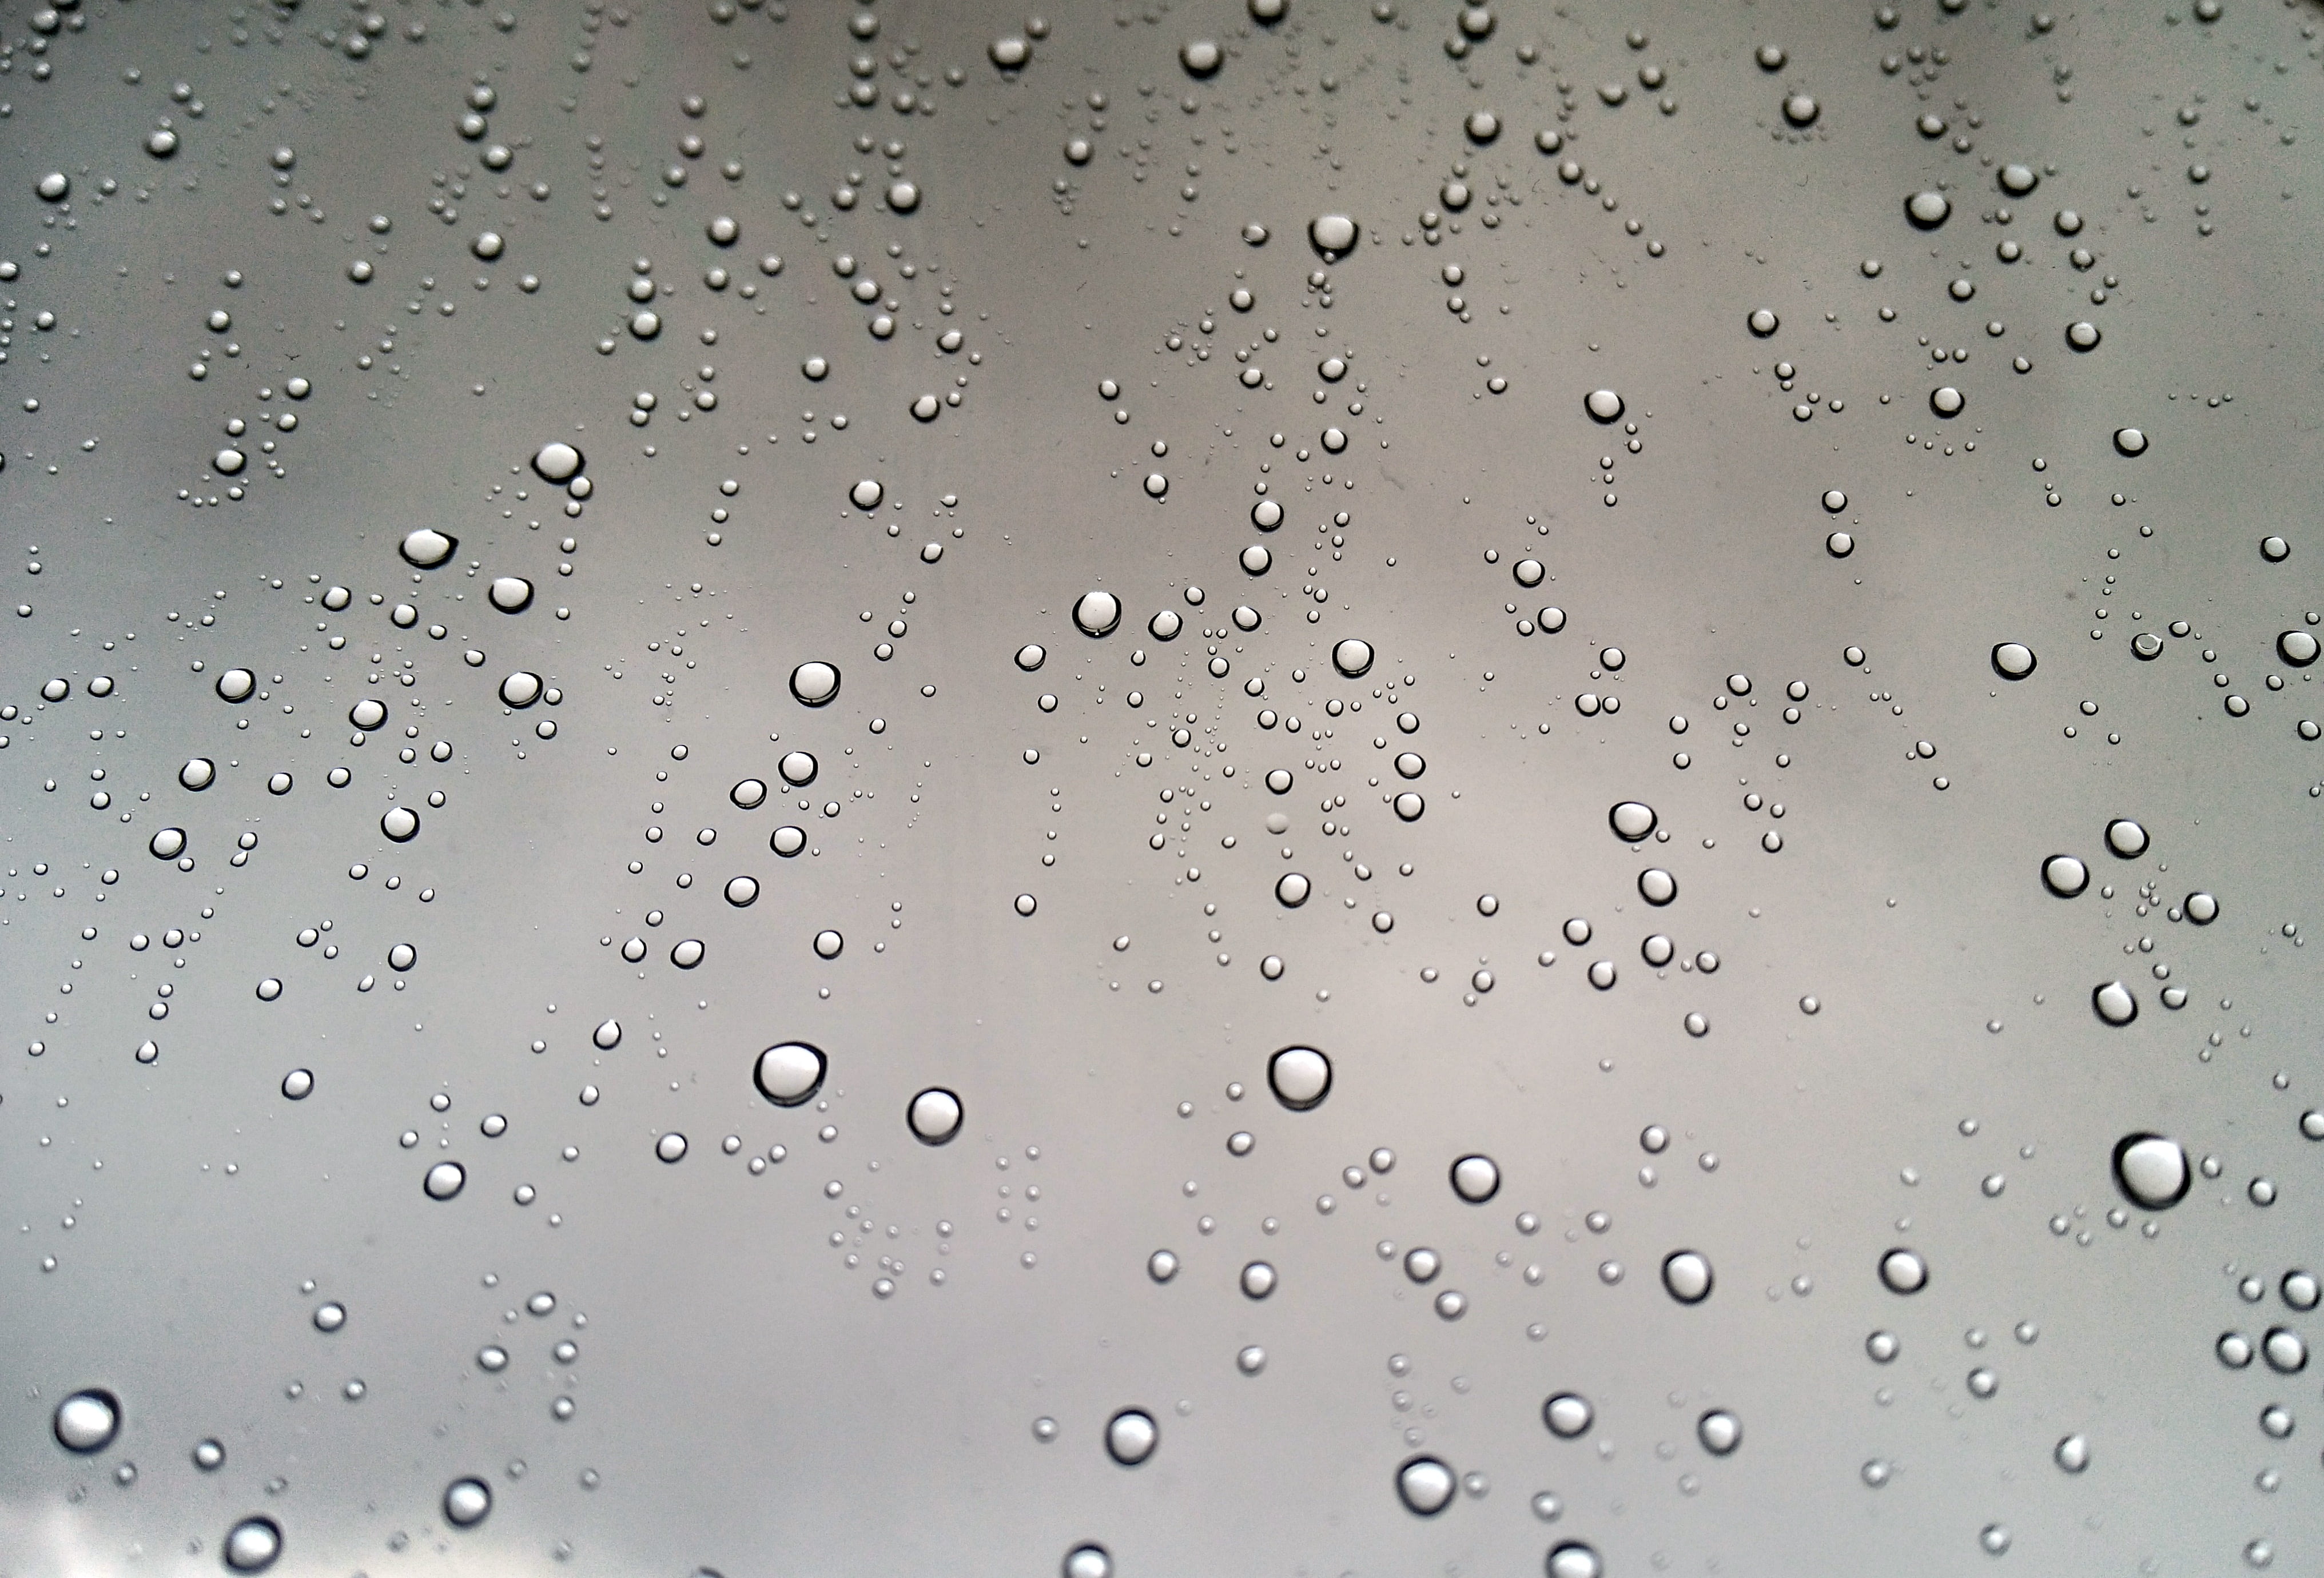 water droplets, rain, cloud, drops, cold, grey, white, storm